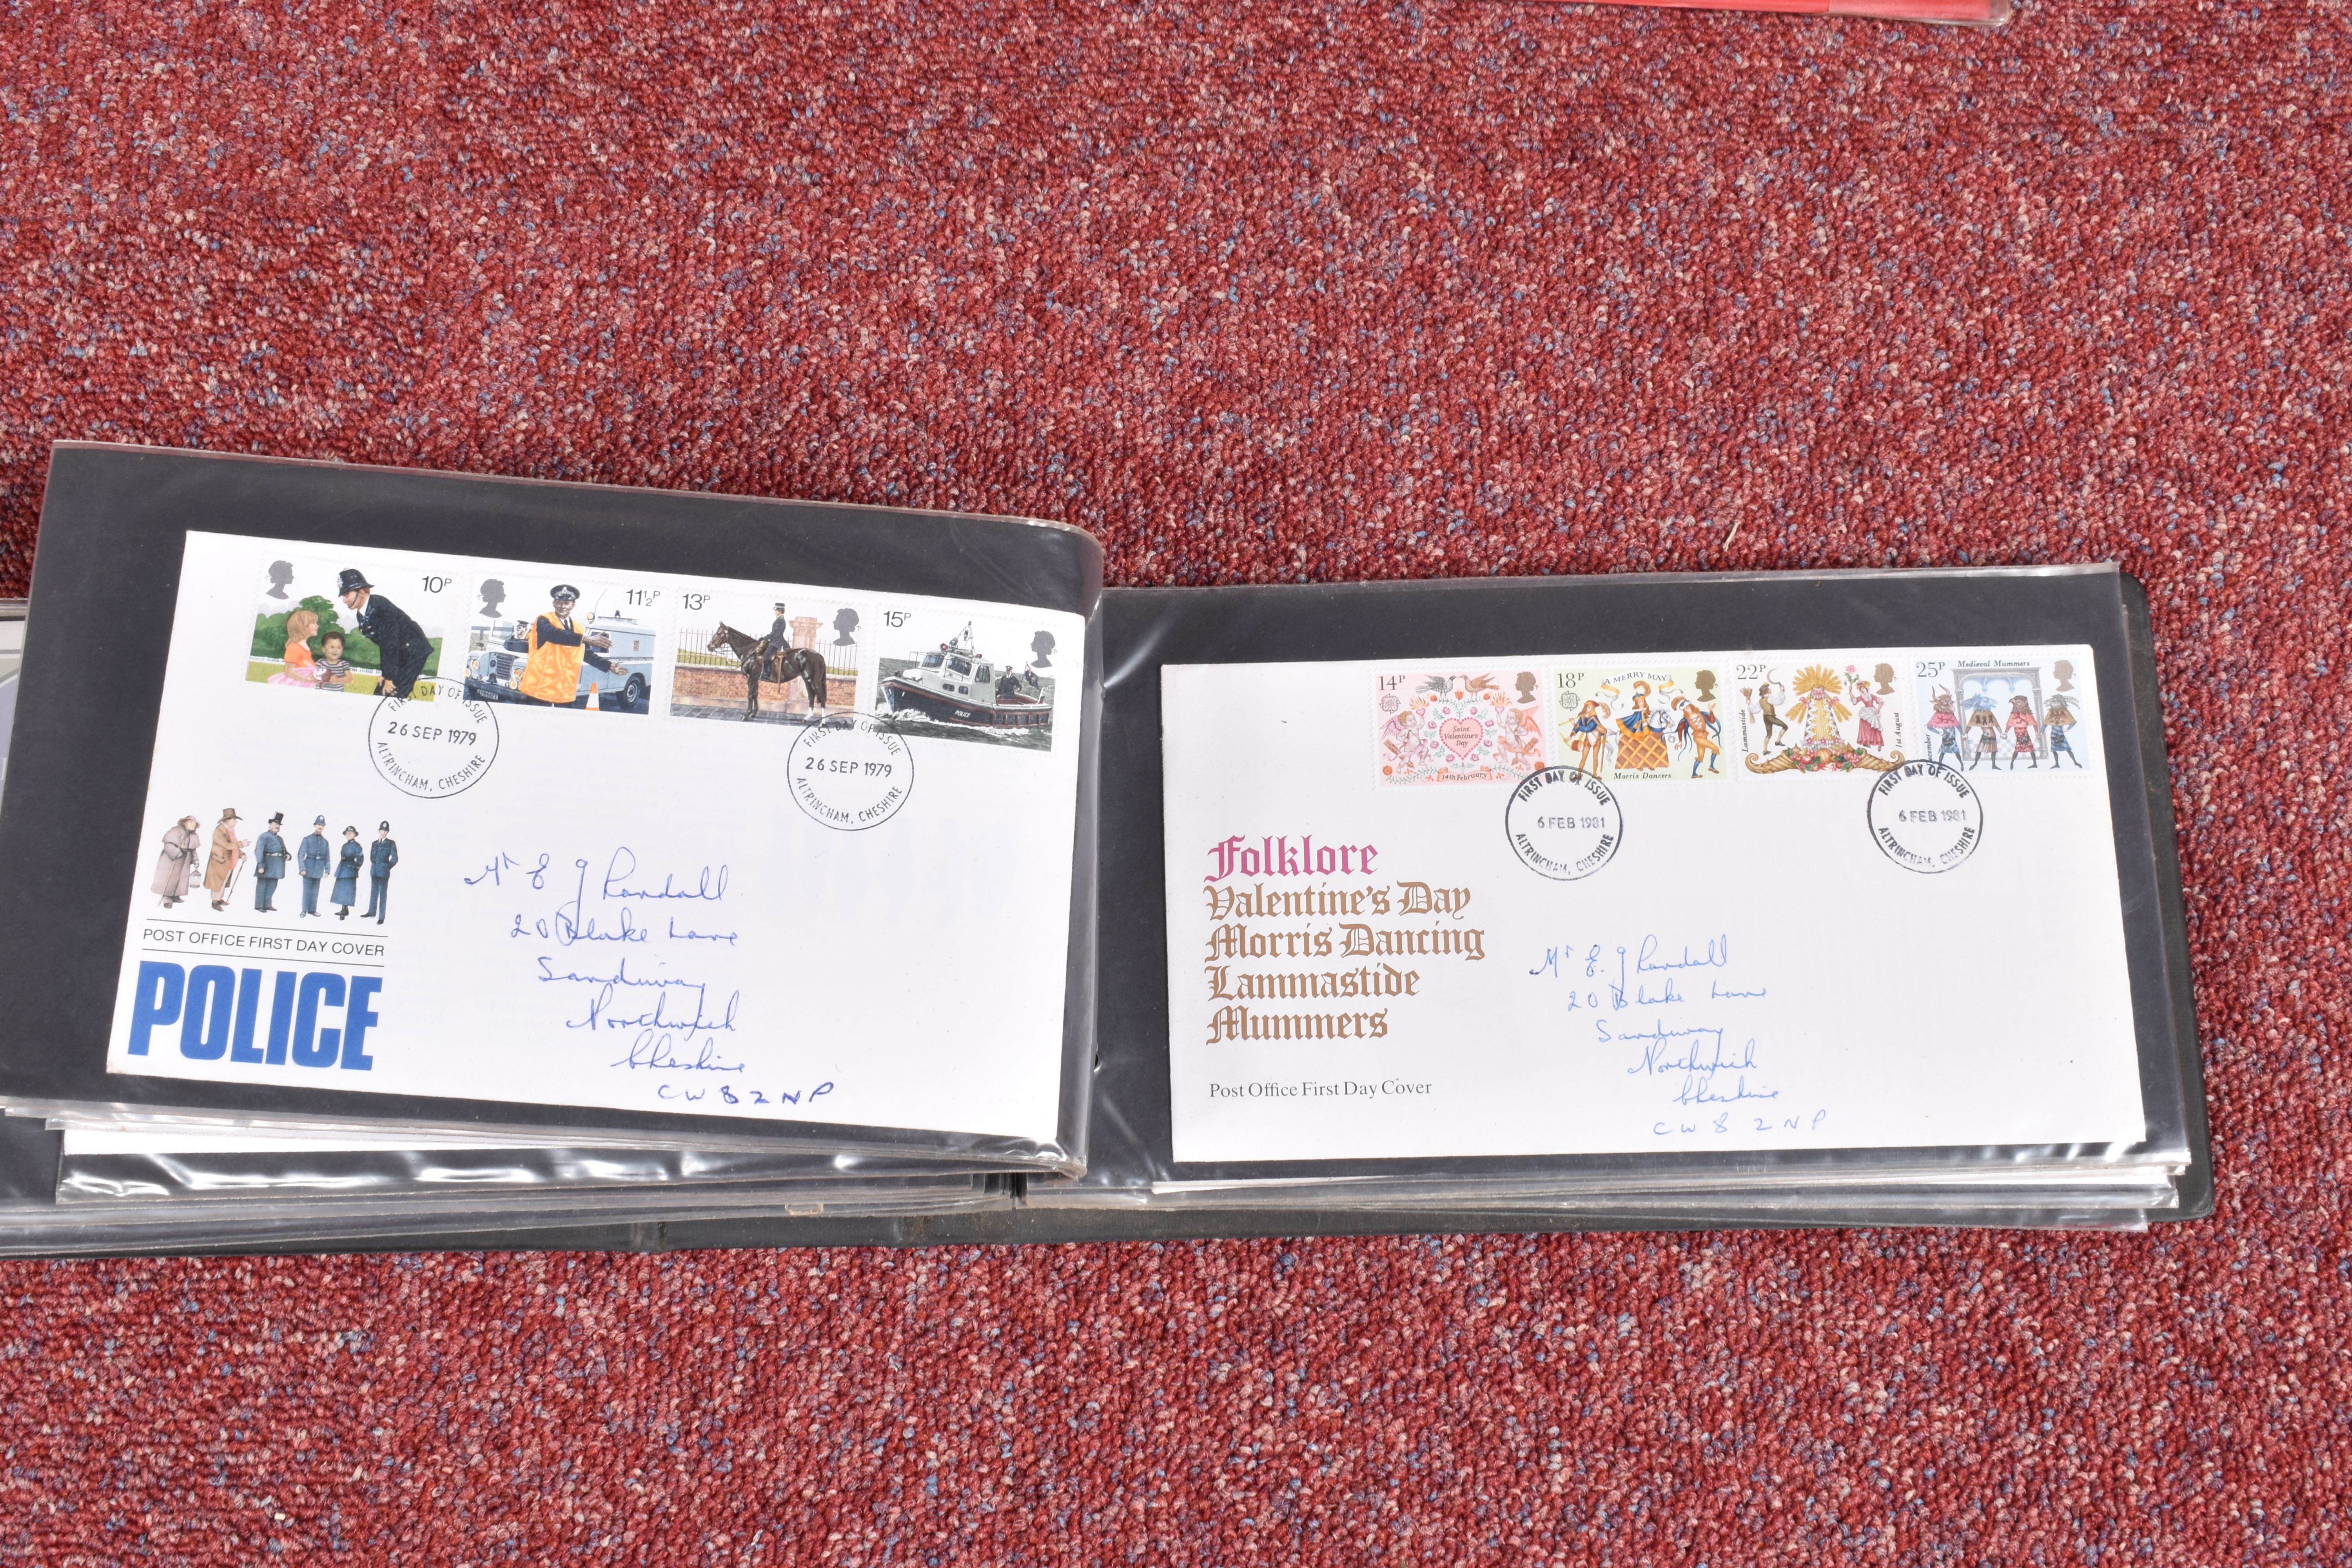 GB COLLECTION OF FIRST DAY COVERS AND PRESENTATION PACKS TOGETHER WITH A FEW BOOKLETS - Image 6 of 9